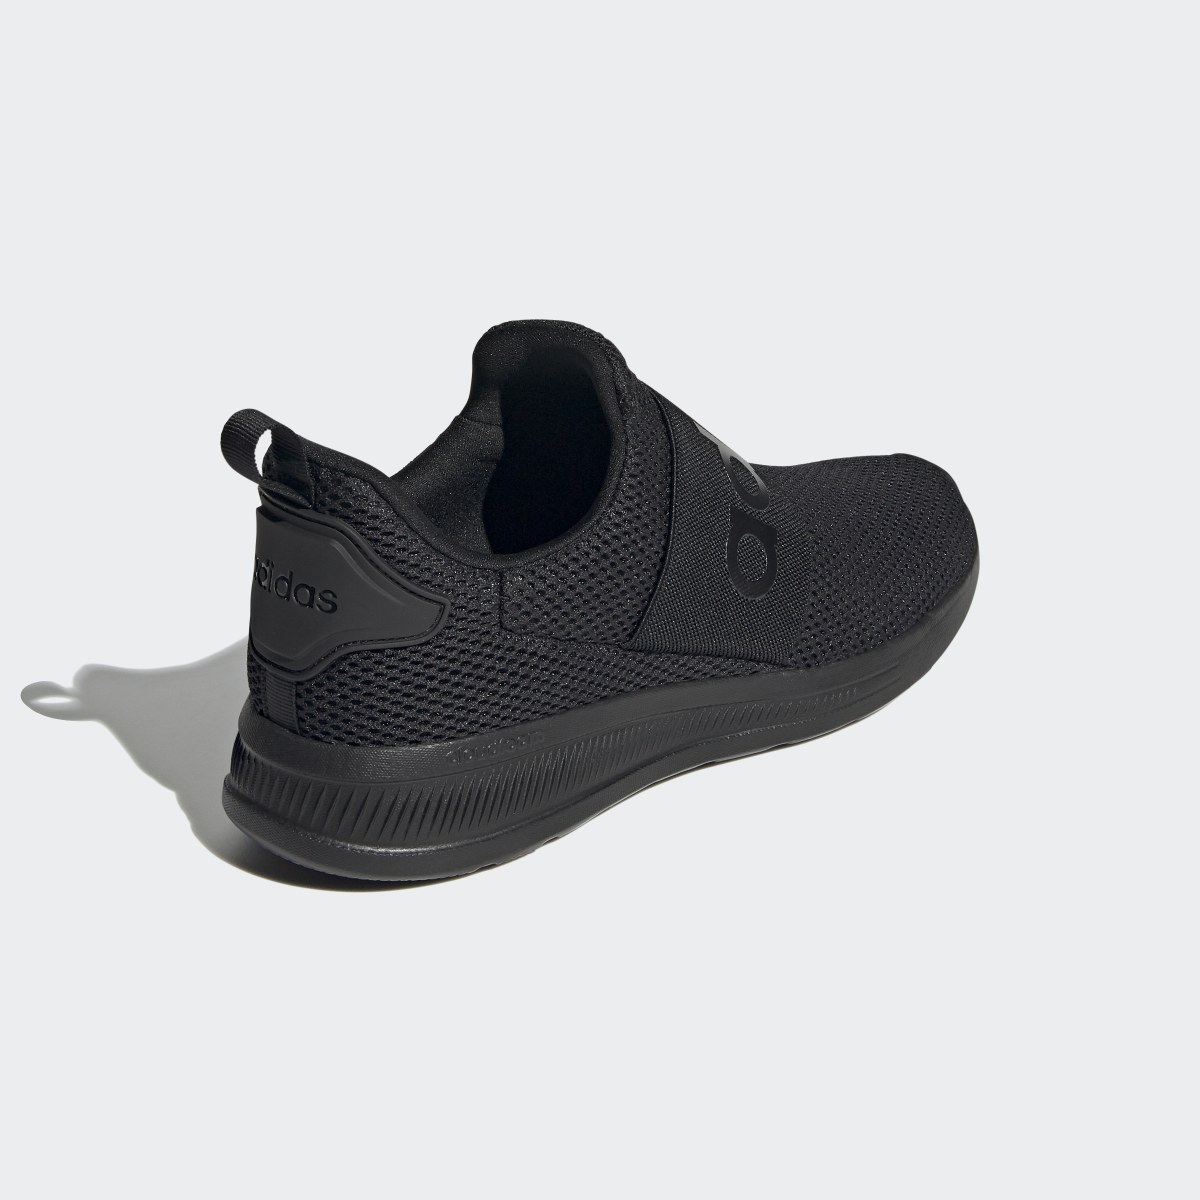 Adidas Lite Racer Adapt 4.0 Shoes. 6